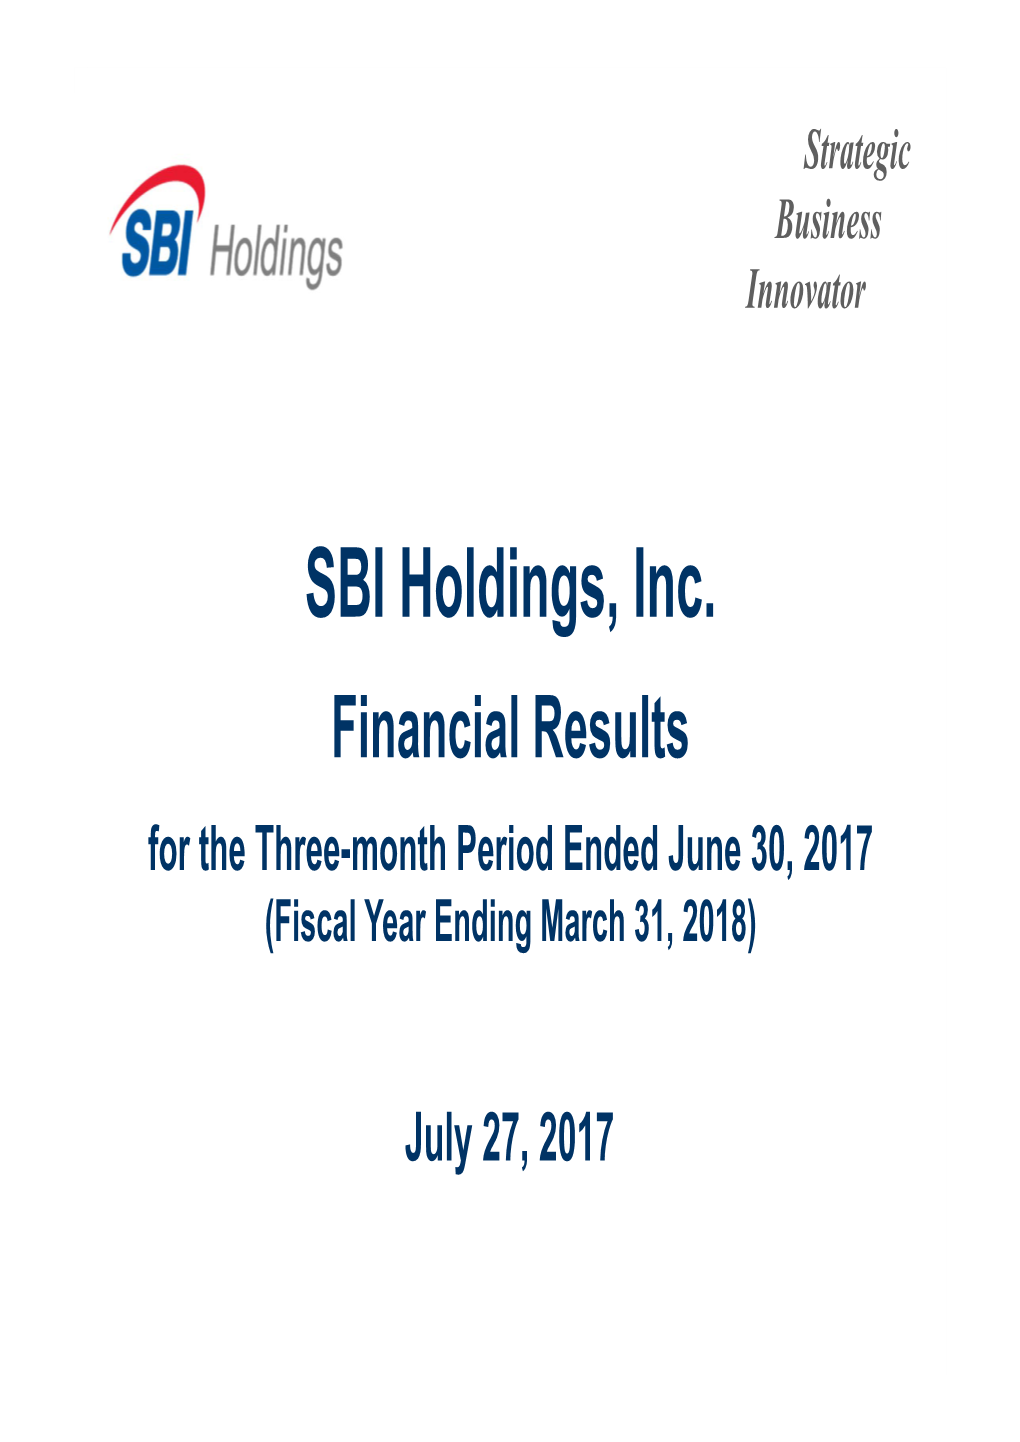 SBI Holdings, Inc.Financial Results for the Three-Month Period Ended